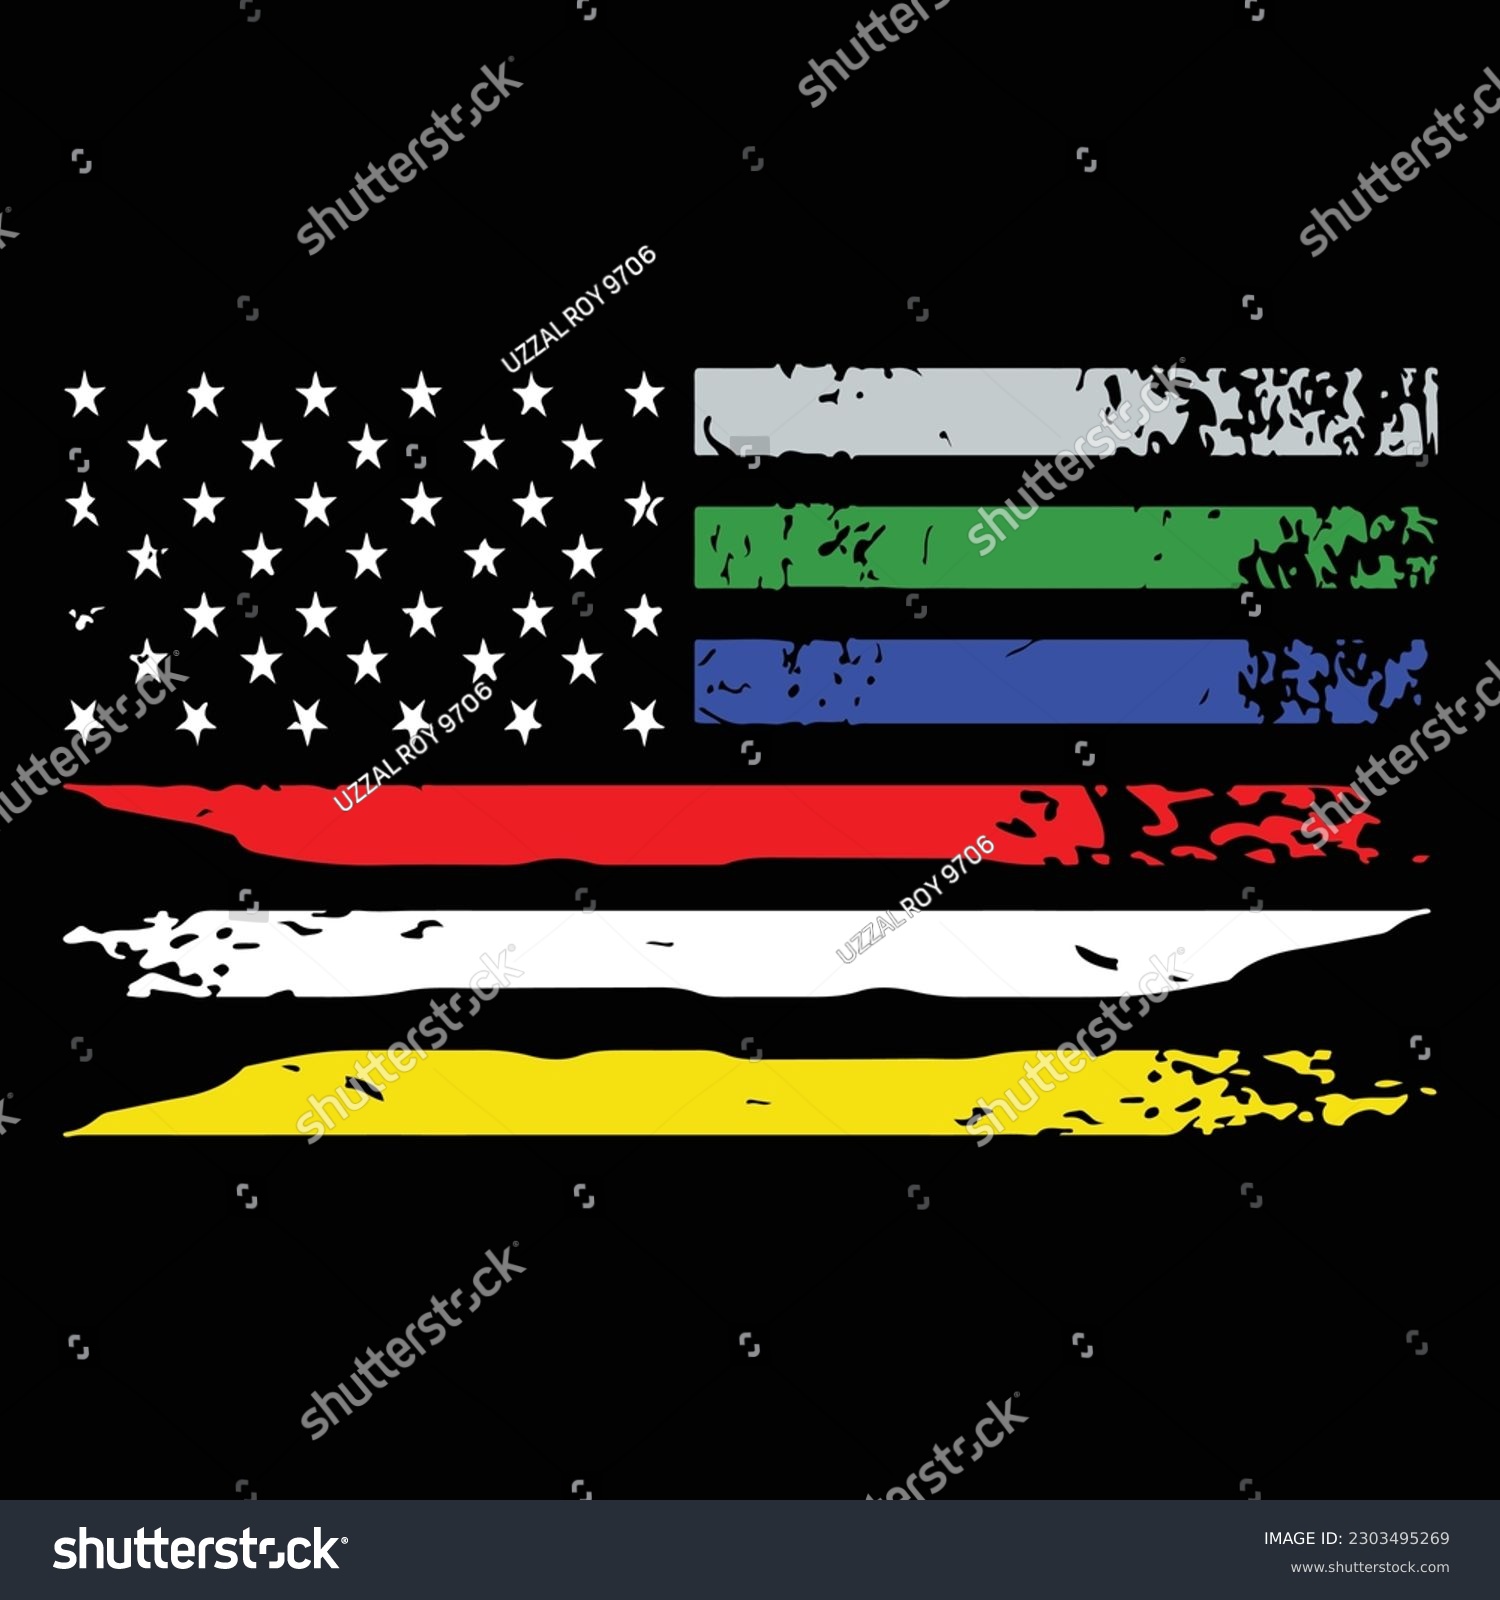 SVG of Thin Line Distressed US Flag Police Fire EMS 911 Dispatch Dept of Corrections svg